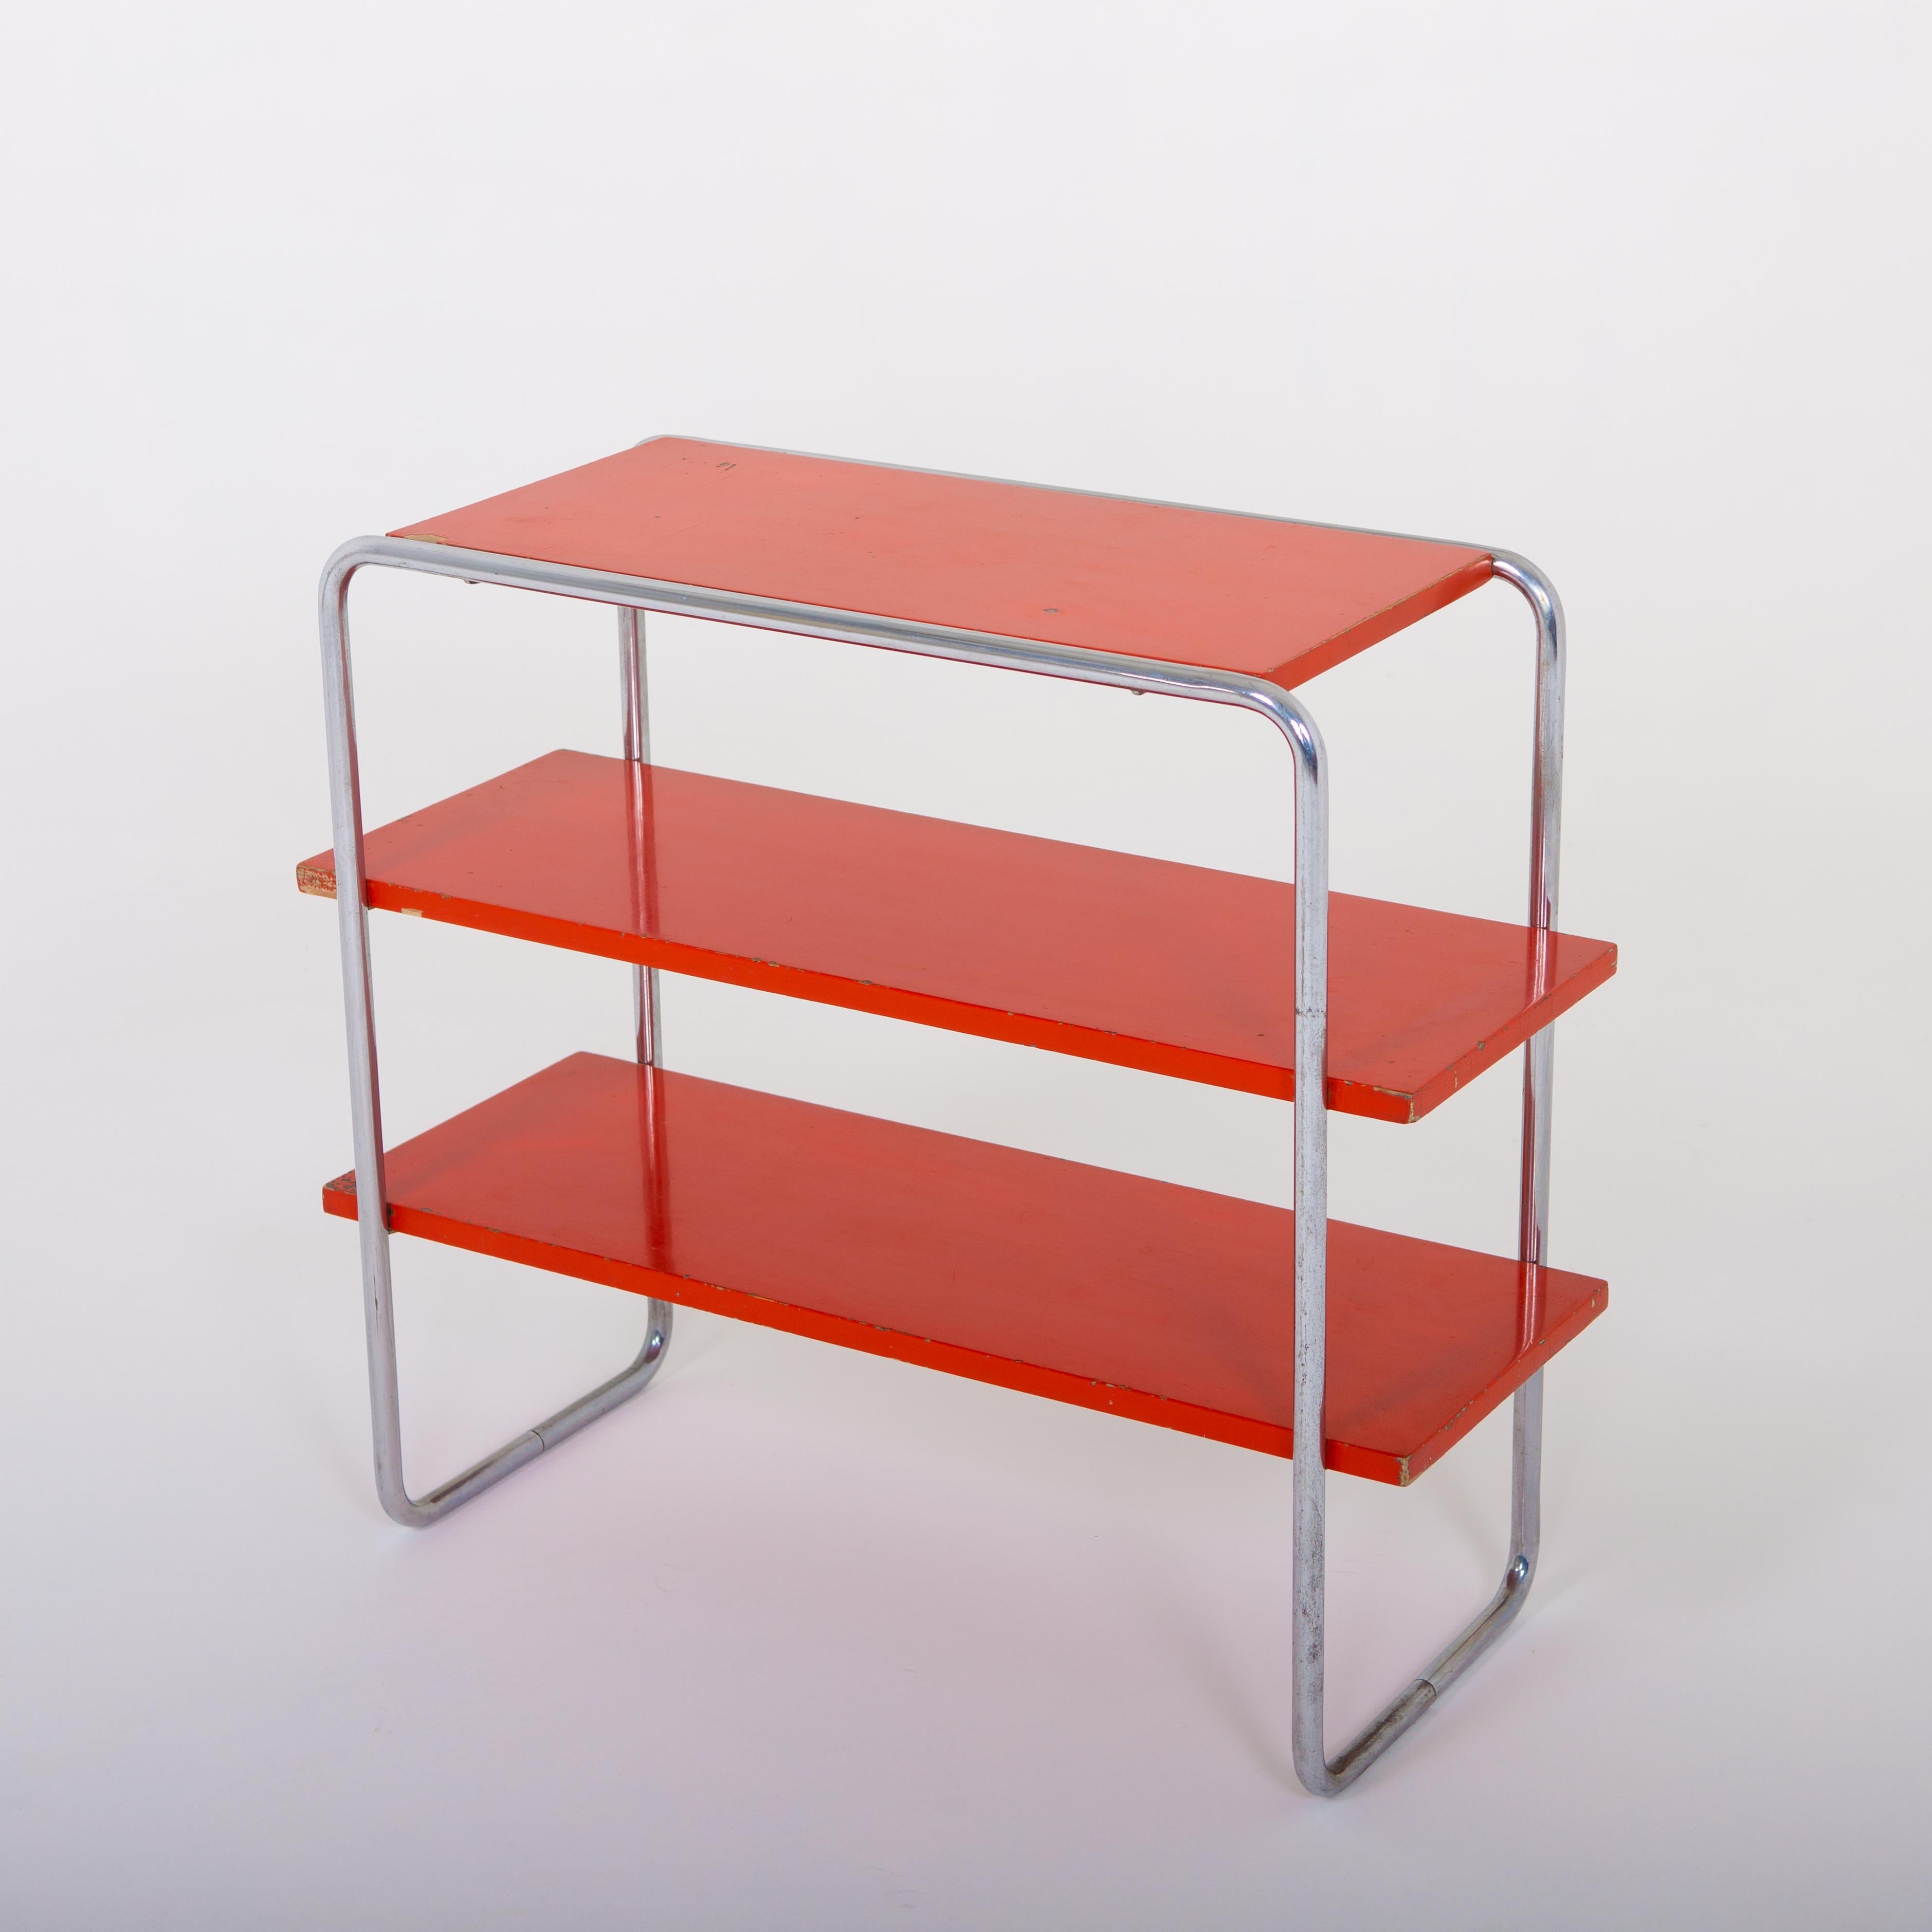 Marcel Breuer bookshelf Mod. B 22, 1930s
Shelf standing on bent tubular steel frame with three red painted shelves. Signs of age and use. The shelf was designed as a file or bookshelf by Marcel Breuer for Thonet (model: B 22; manufacturer: